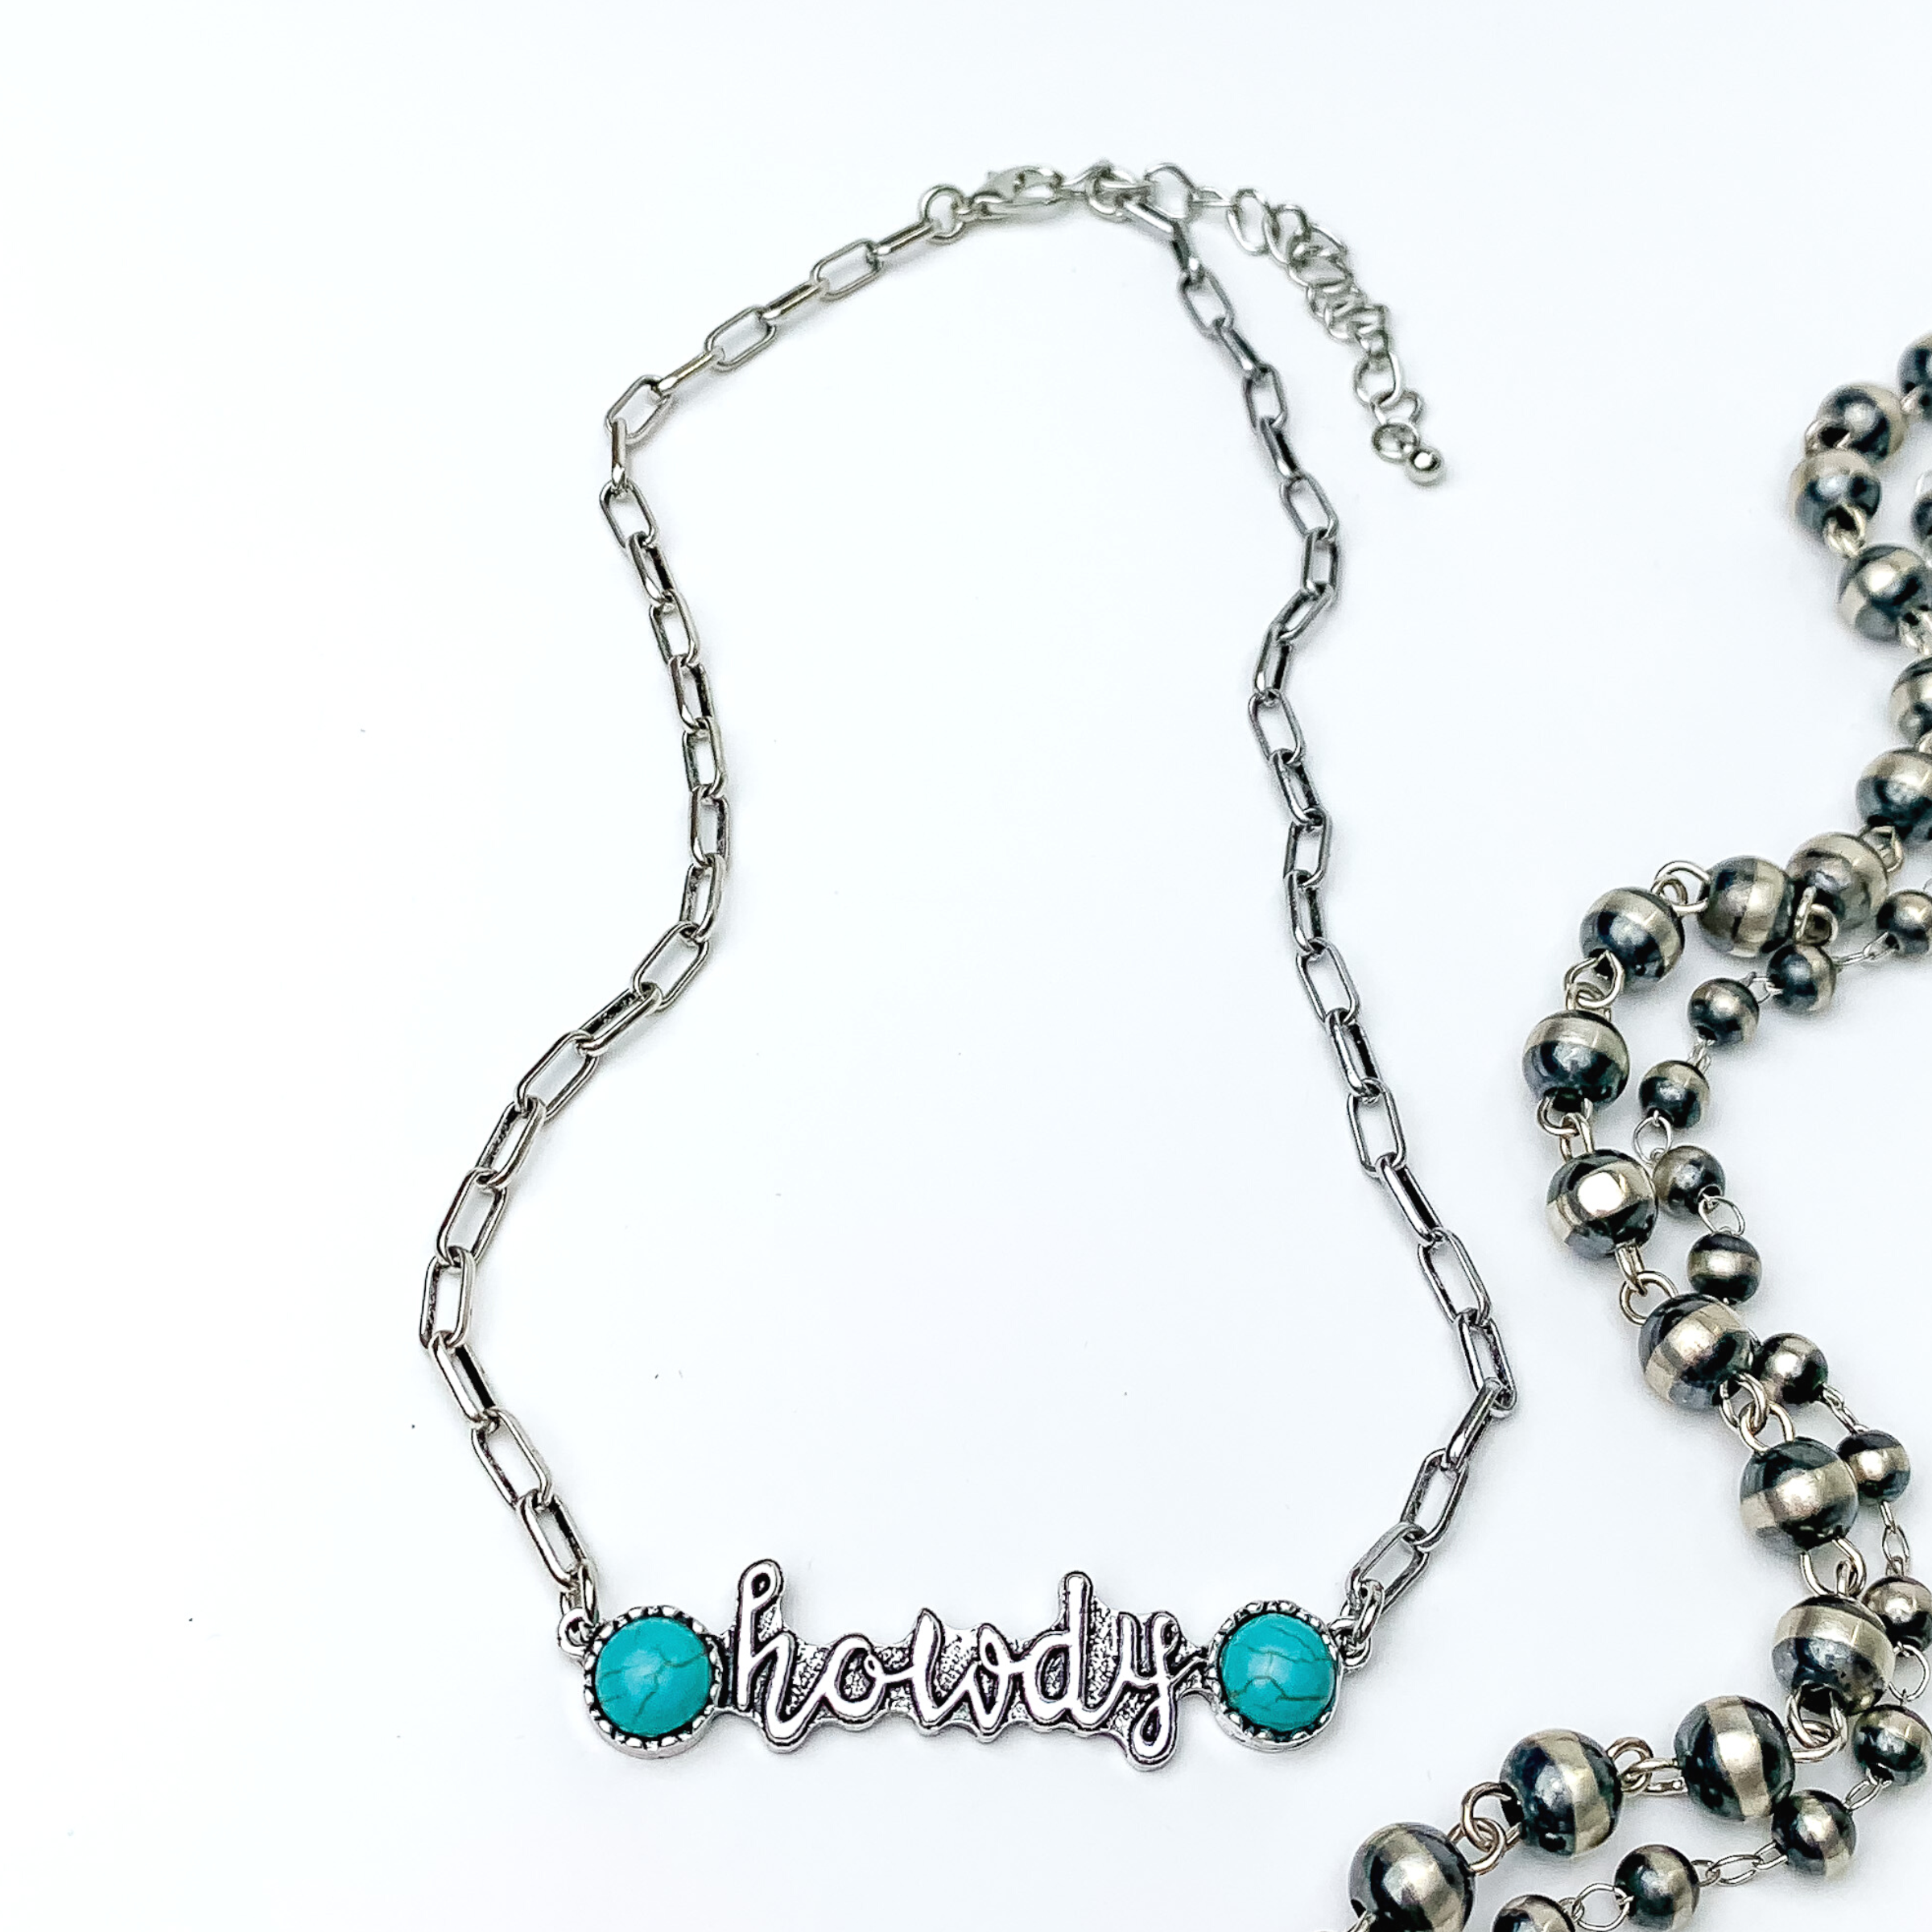 Silver chain necklace with a silver pendant that spells out "howdy" in cursive. At each end of the word is a circle, turquoise stone. This necklae is pictured on a white background with silver beads on the right side.